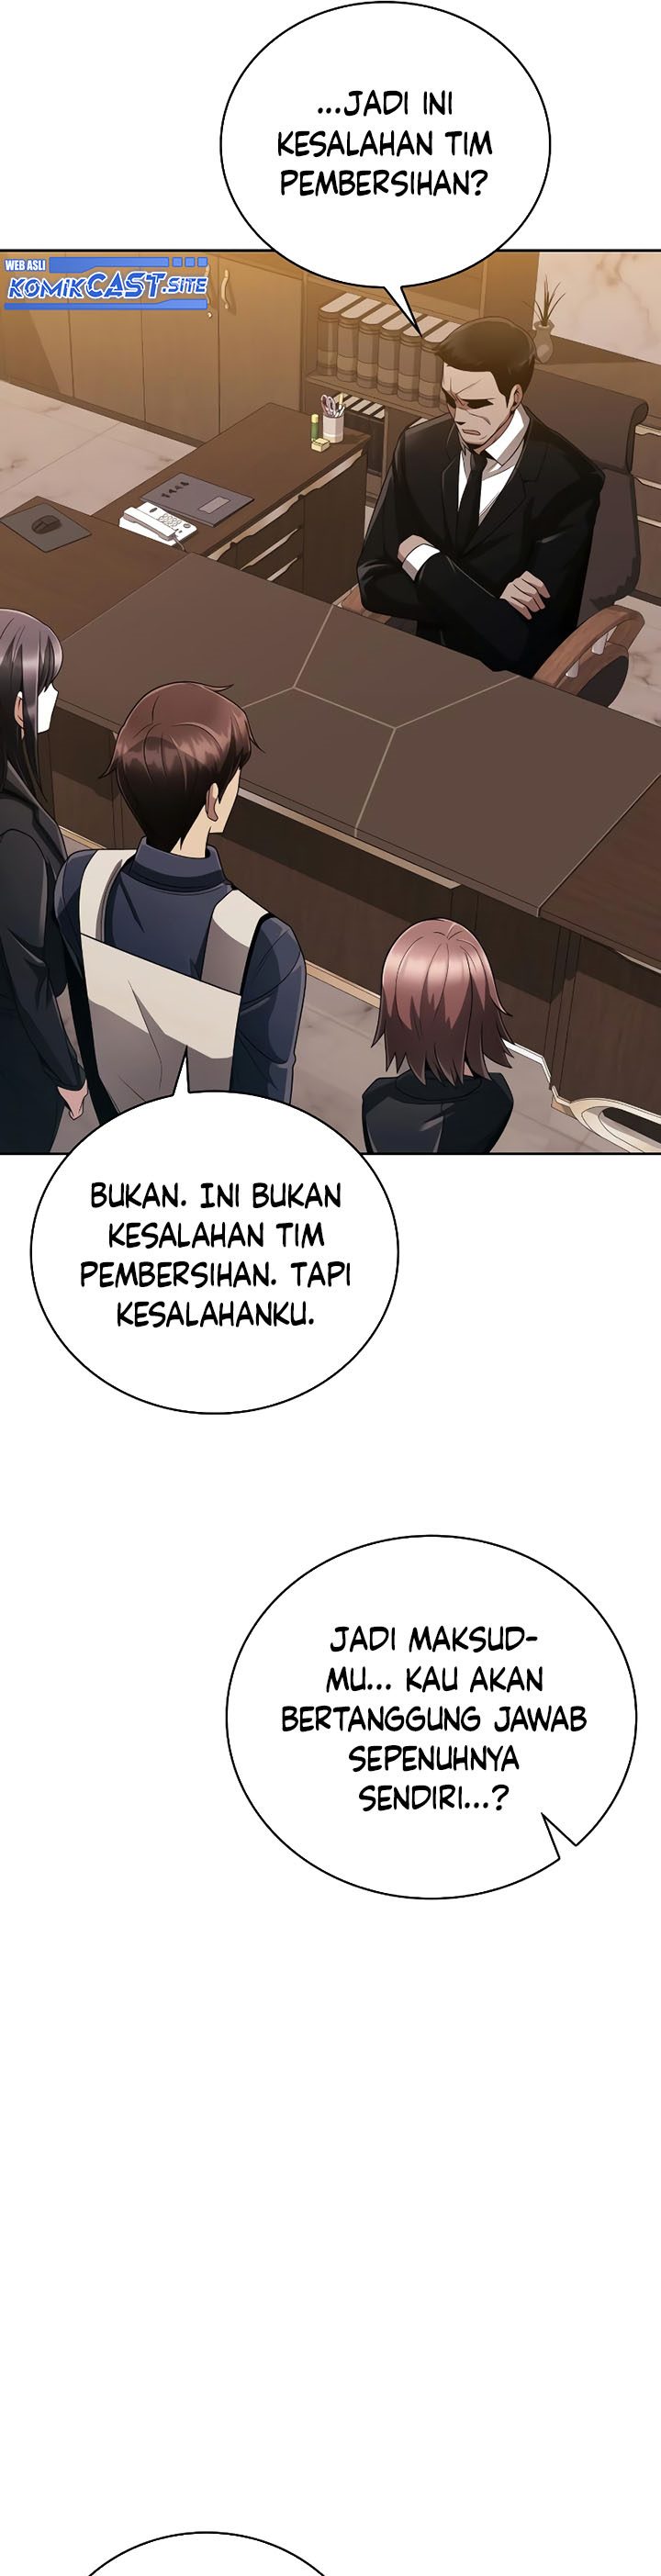 Dilarang COPAS - situs resmi www.mangacanblog.com - Komik clever cleaning life of the returned genius hunter 019 - chapter 19 20 Indonesia clever cleaning life of the returned genius hunter 019 - chapter 19 Terbaru 34|Baca Manga Komik Indonesia|Mangacan